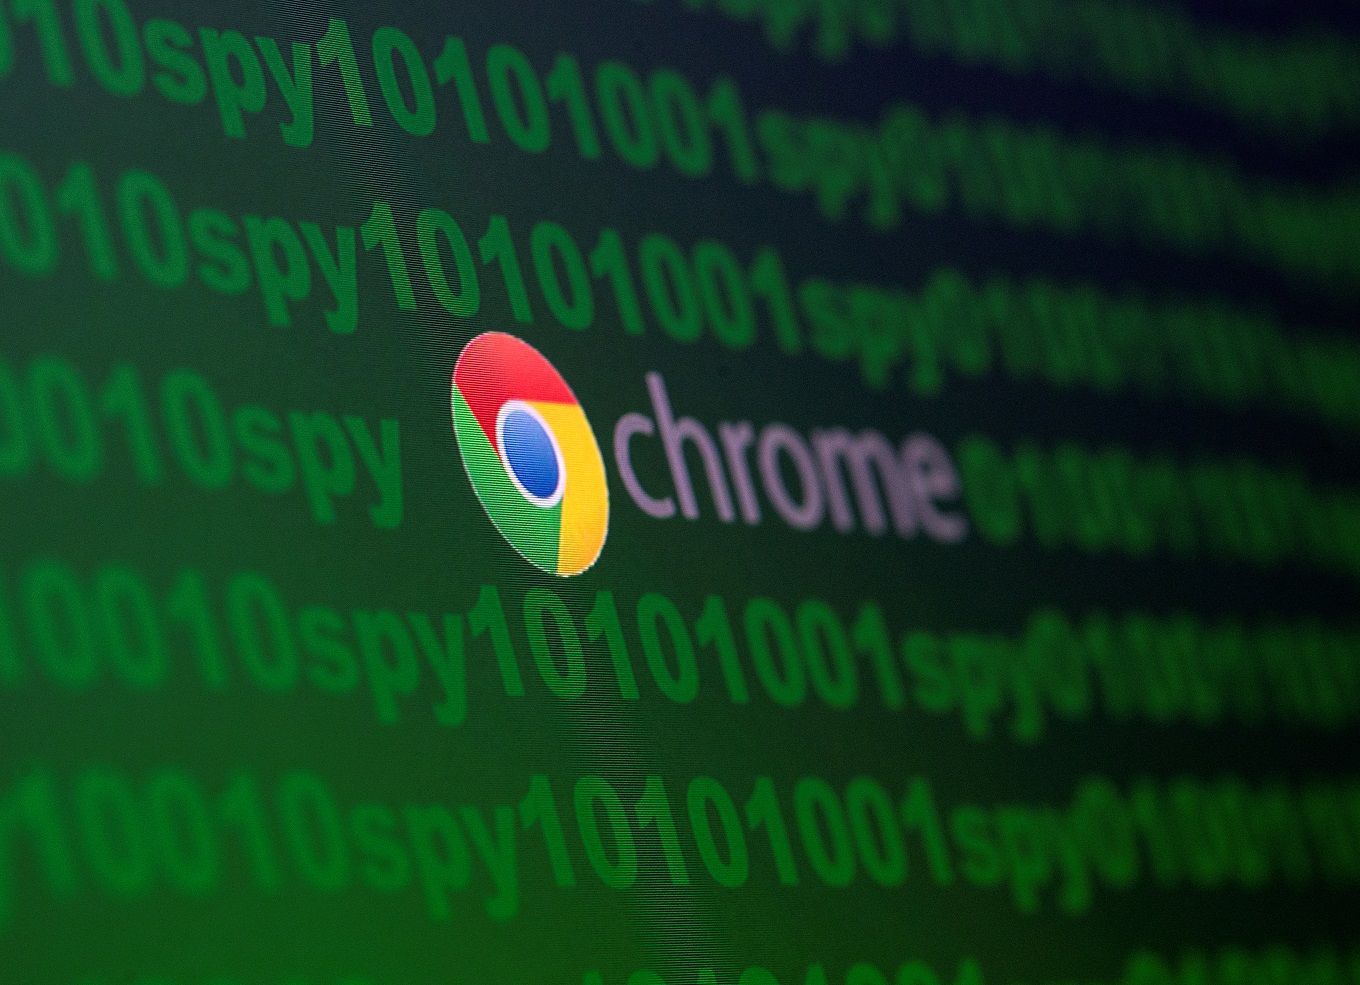 Google Chrome extensions involved in massive spying campaign